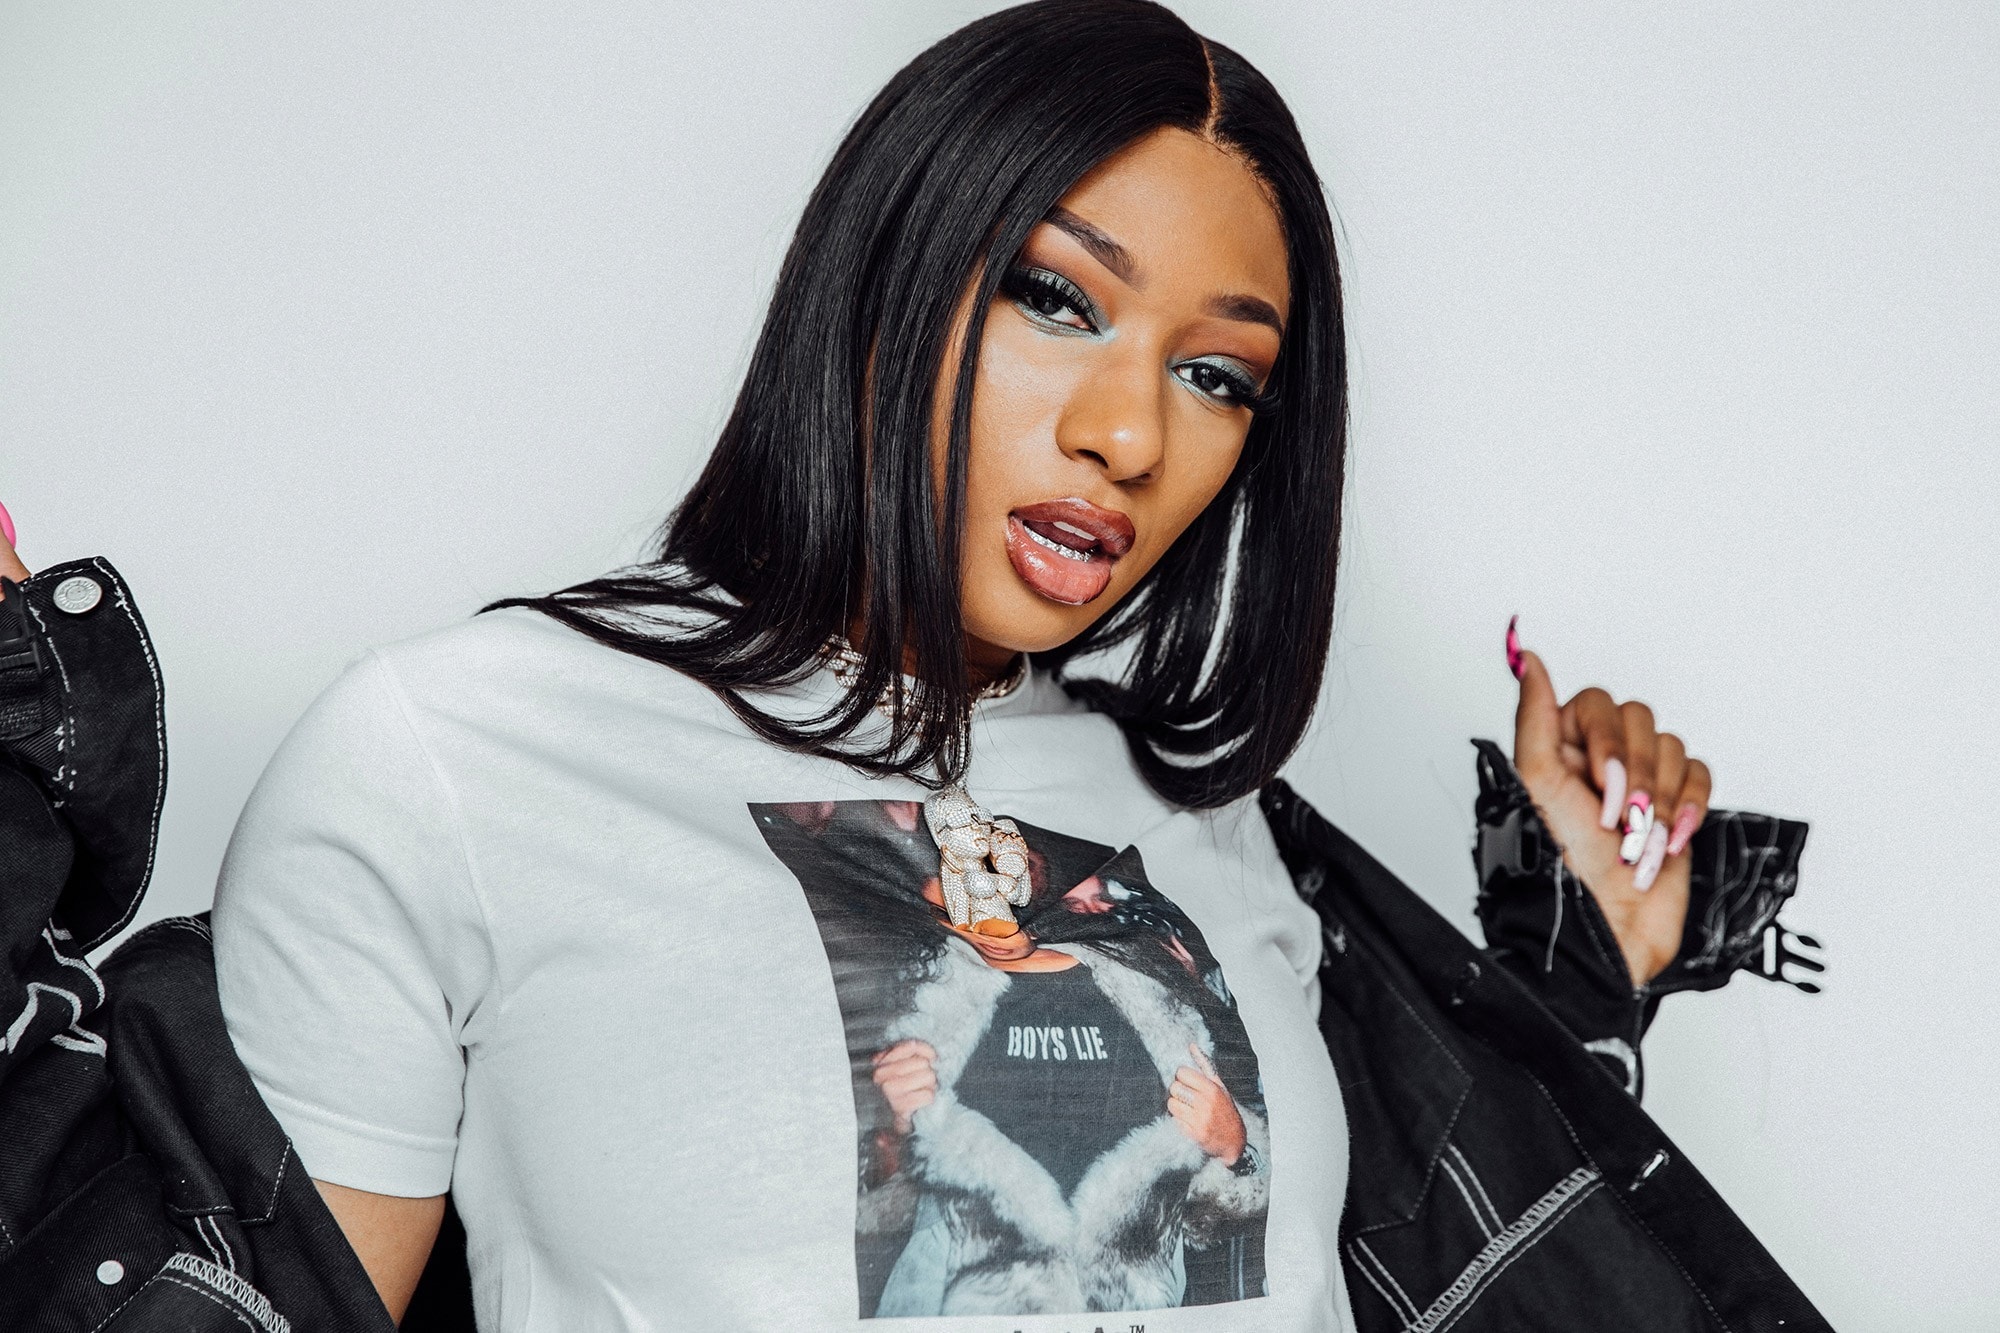 Megan Thee Stallion Claims Tory Lanez Shot Her HYPEBEAST Music News Altercation Gunshot Wound WAP Hot Girl Meg Legal District Attorney Charges Pending